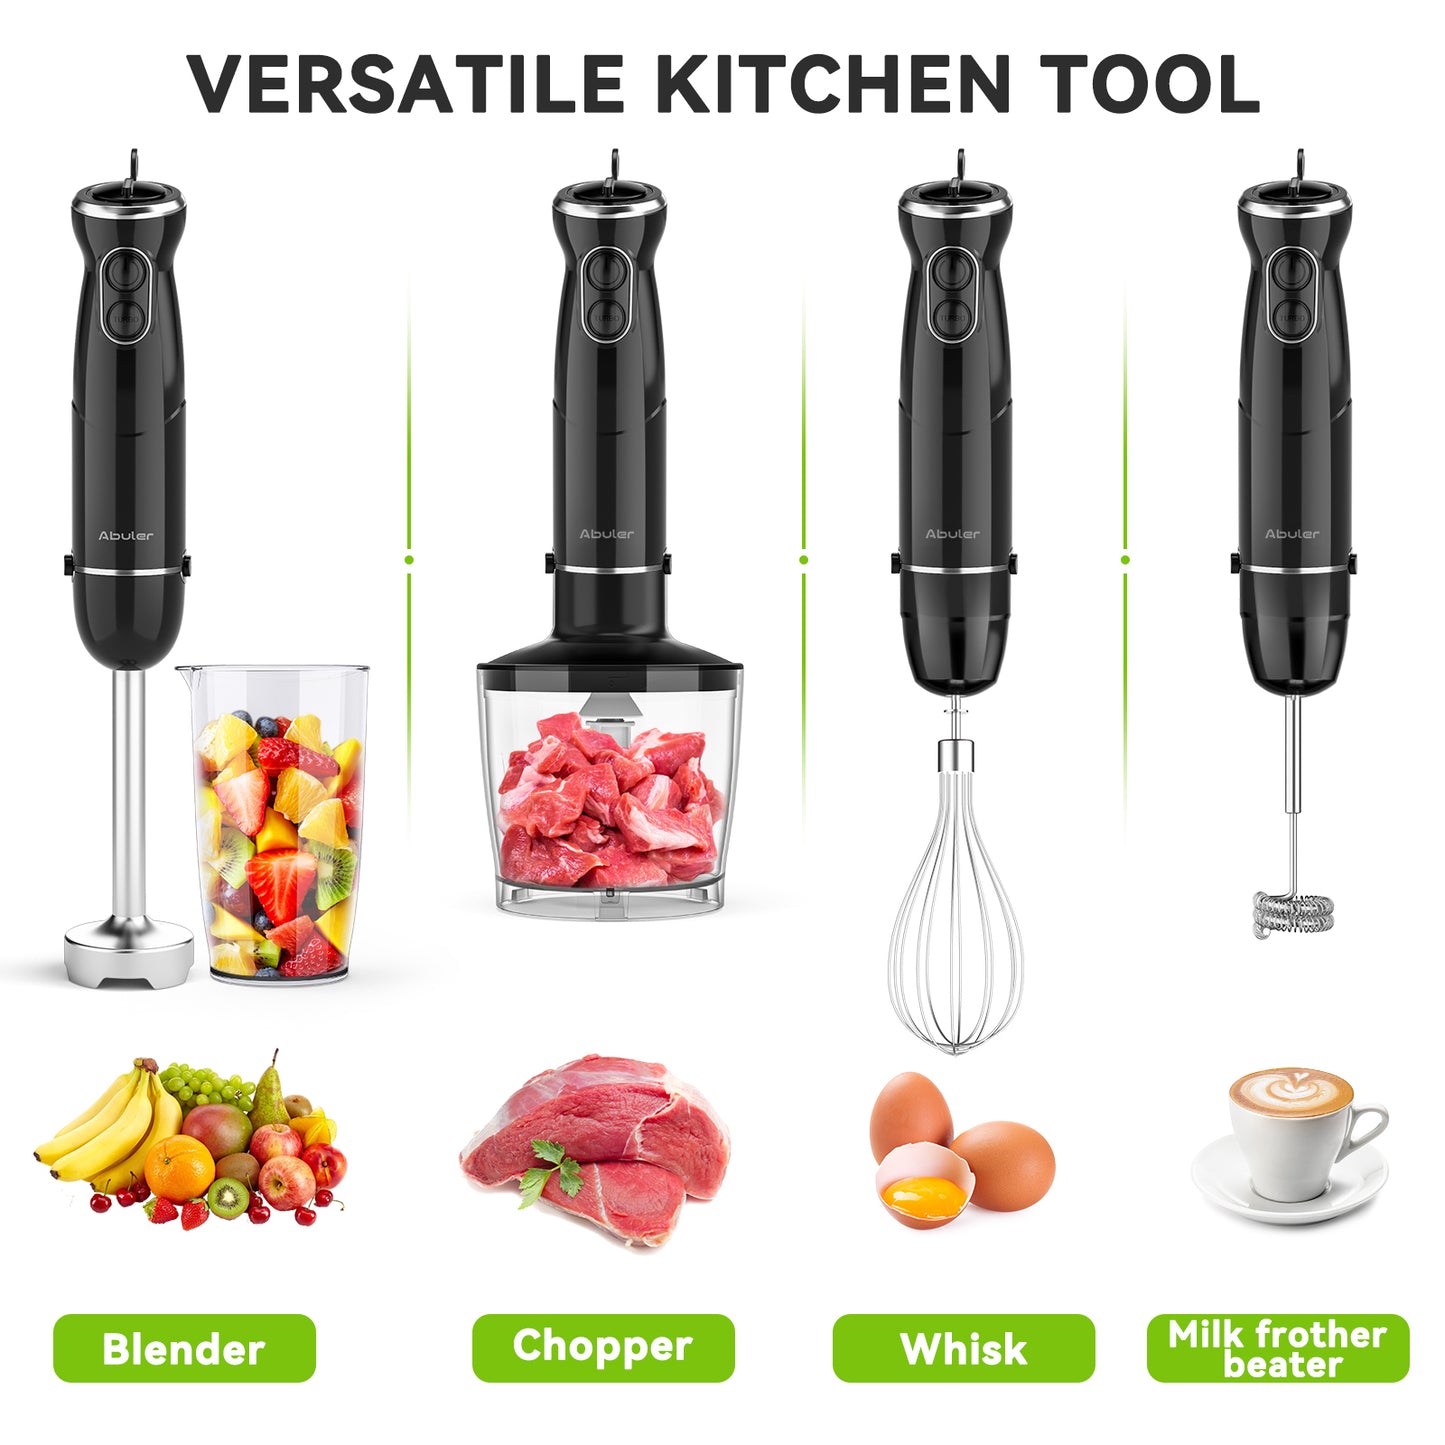 Abuler Handheld Immersion Blender 5 in 1 - 800W Hand Mixer Stick with 12 Speeds, Turbo Mode, and Stainless Steel Blades - Includes Mixing Beaker, Chopper, Whisk, and Milk Frother - Ideal for Soups, Smoothies, Baby Food, Sauces - Black